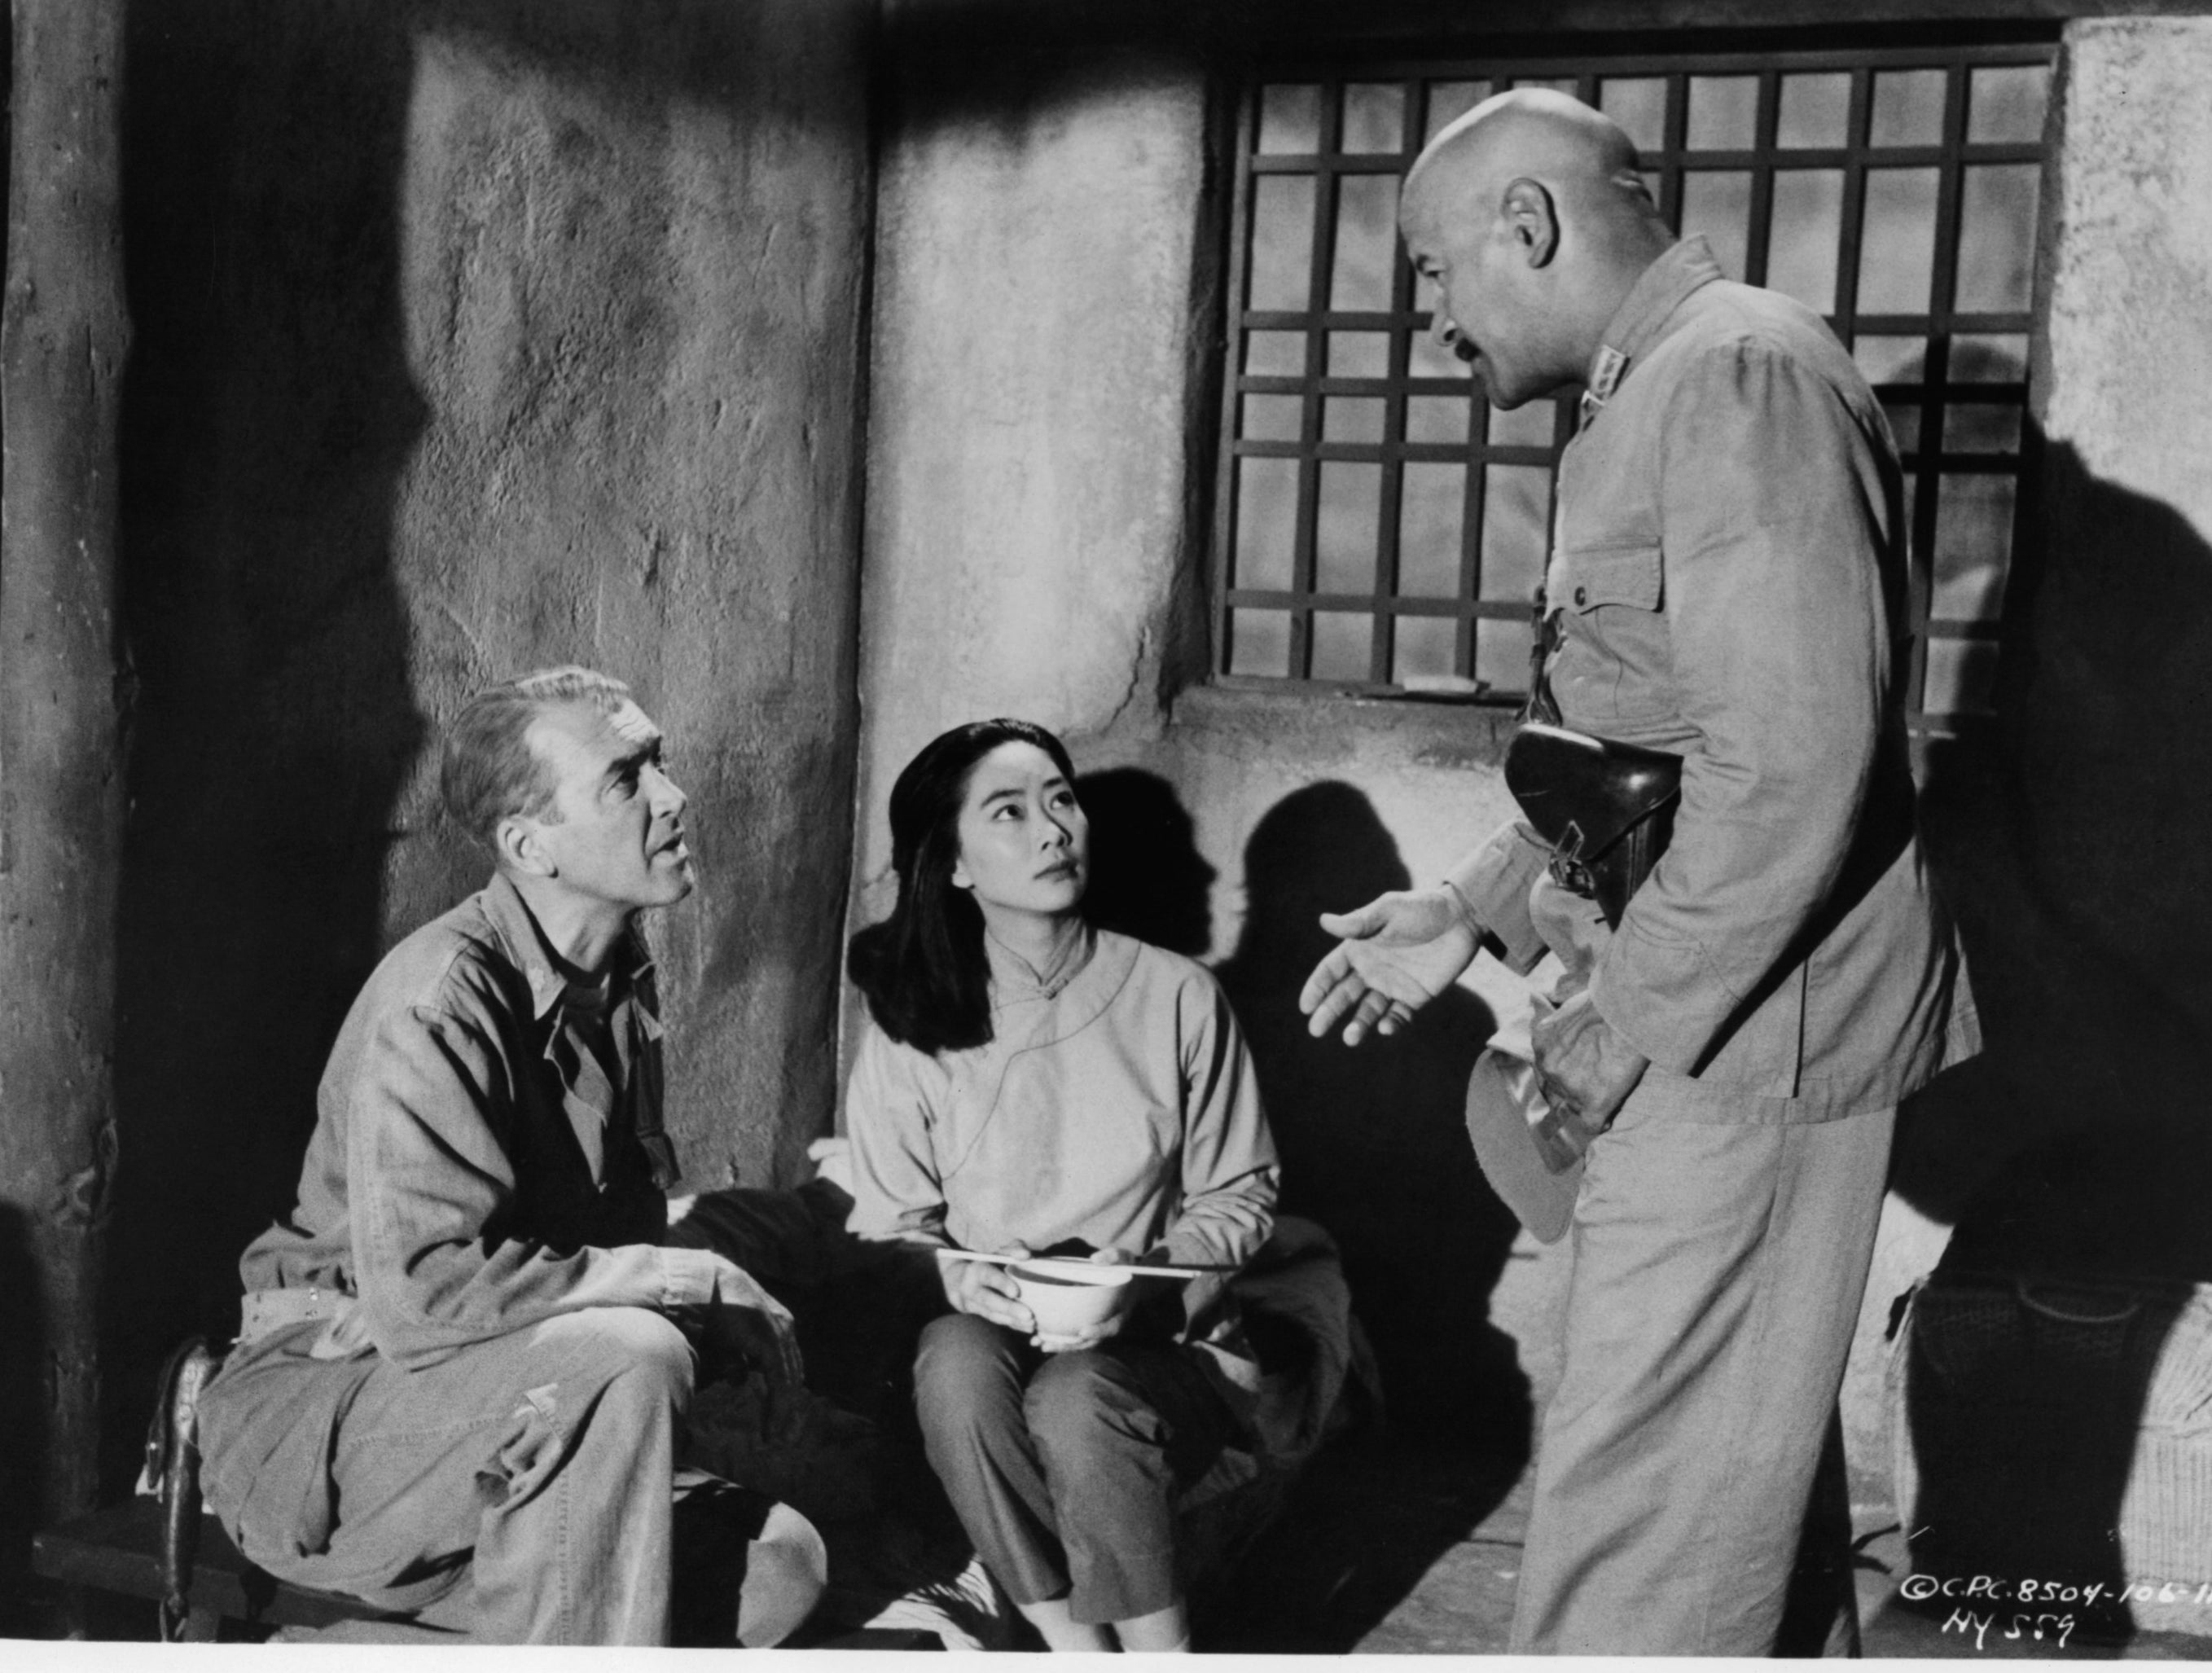 James Stewart and Lisa Lu are spoken to by unidentified man with gun in a scene from the film &#x27;The Mountain Road&#x27;, 1960